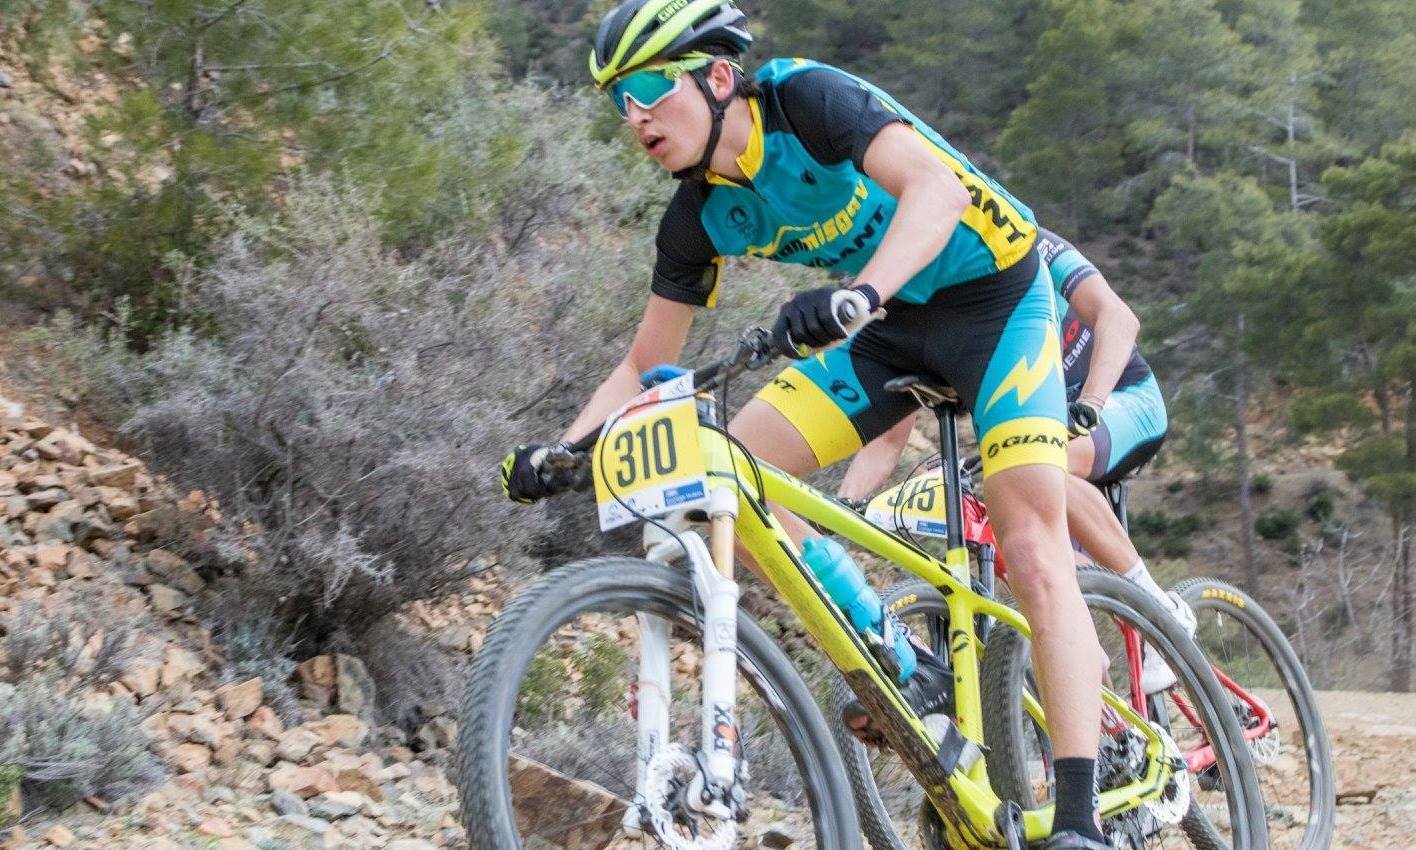 Help fund my trip to MTB european and world  championships 